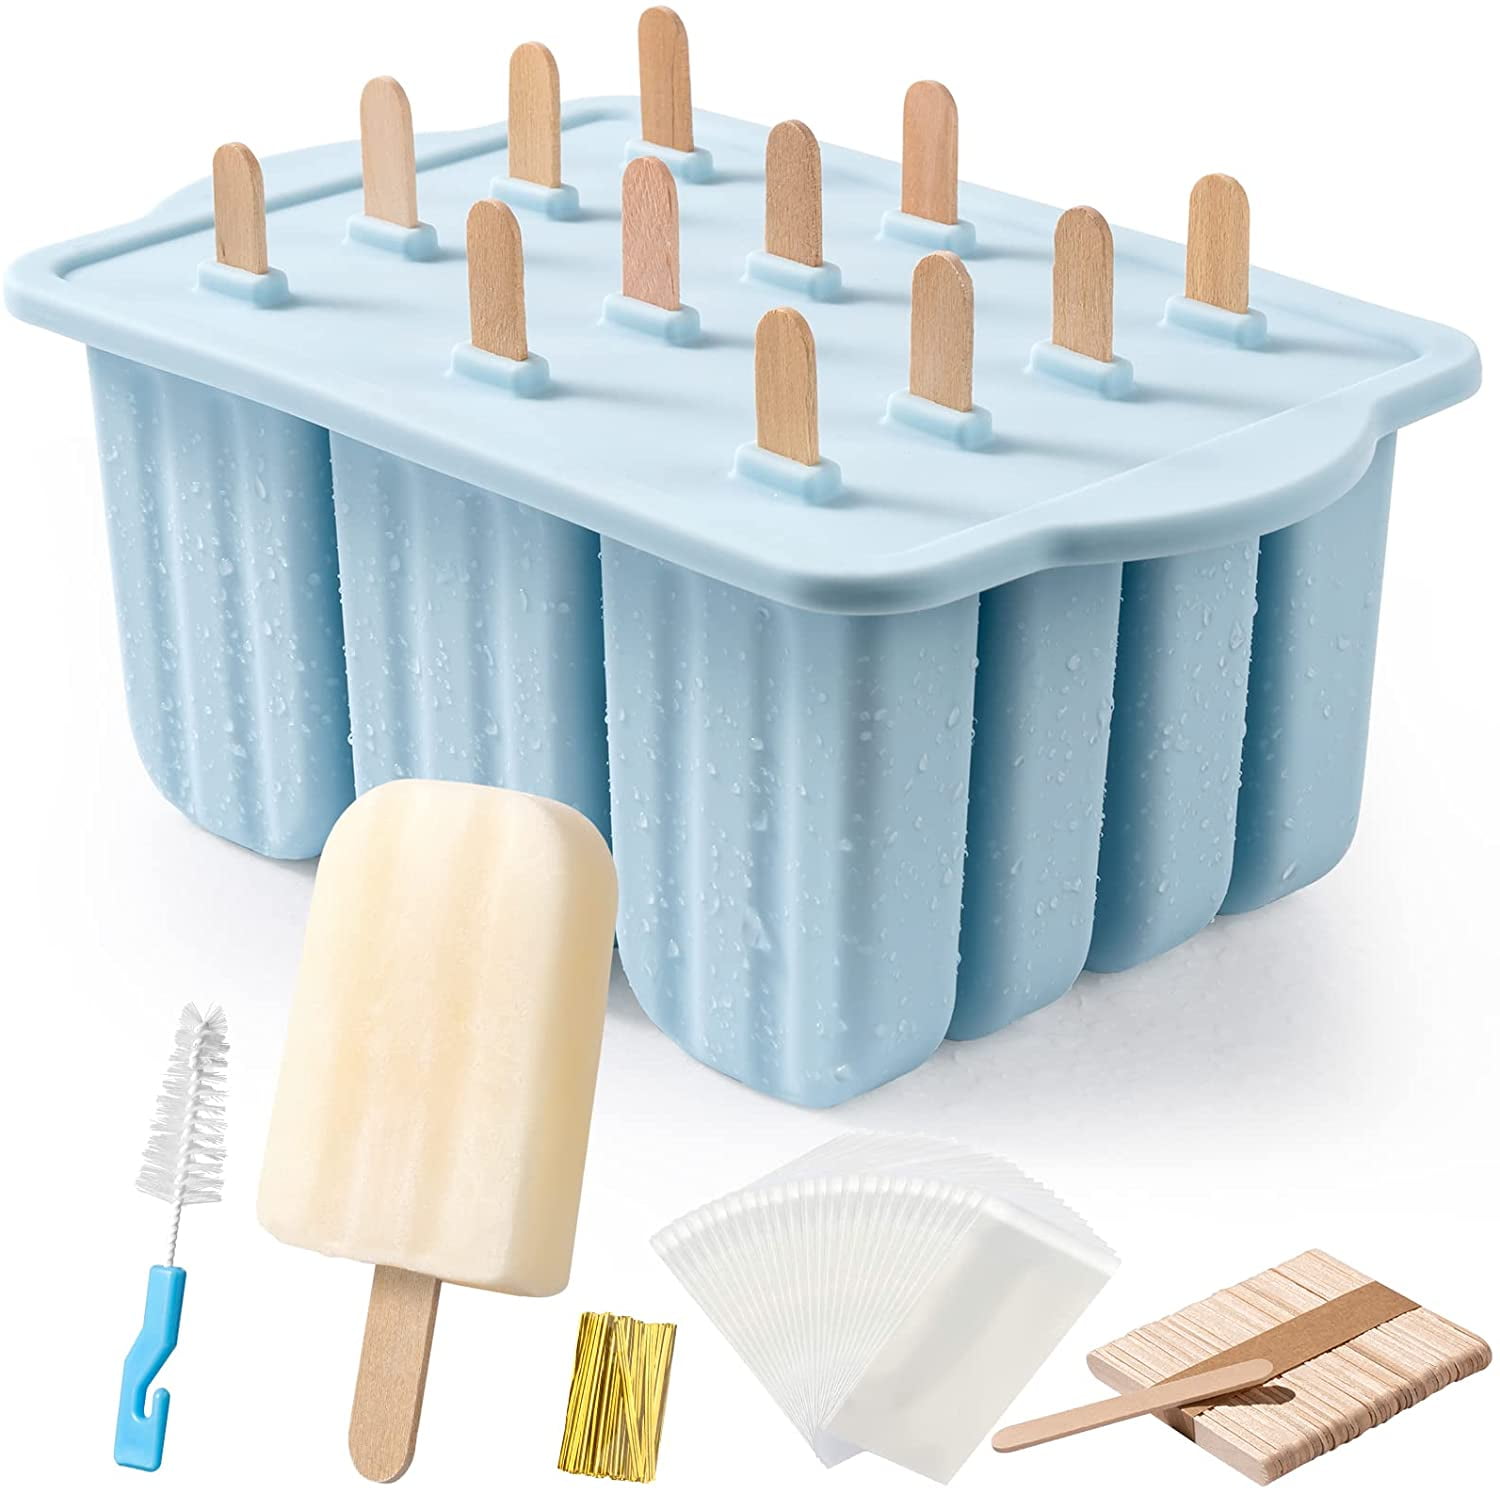 Popsicle Molds 12 Cavities BPA Free Silicone Popsicle Molds, Reusable  Popcicale Mould Silicone for Kids, Ice Pop Molds Silicone Popsicle Maker